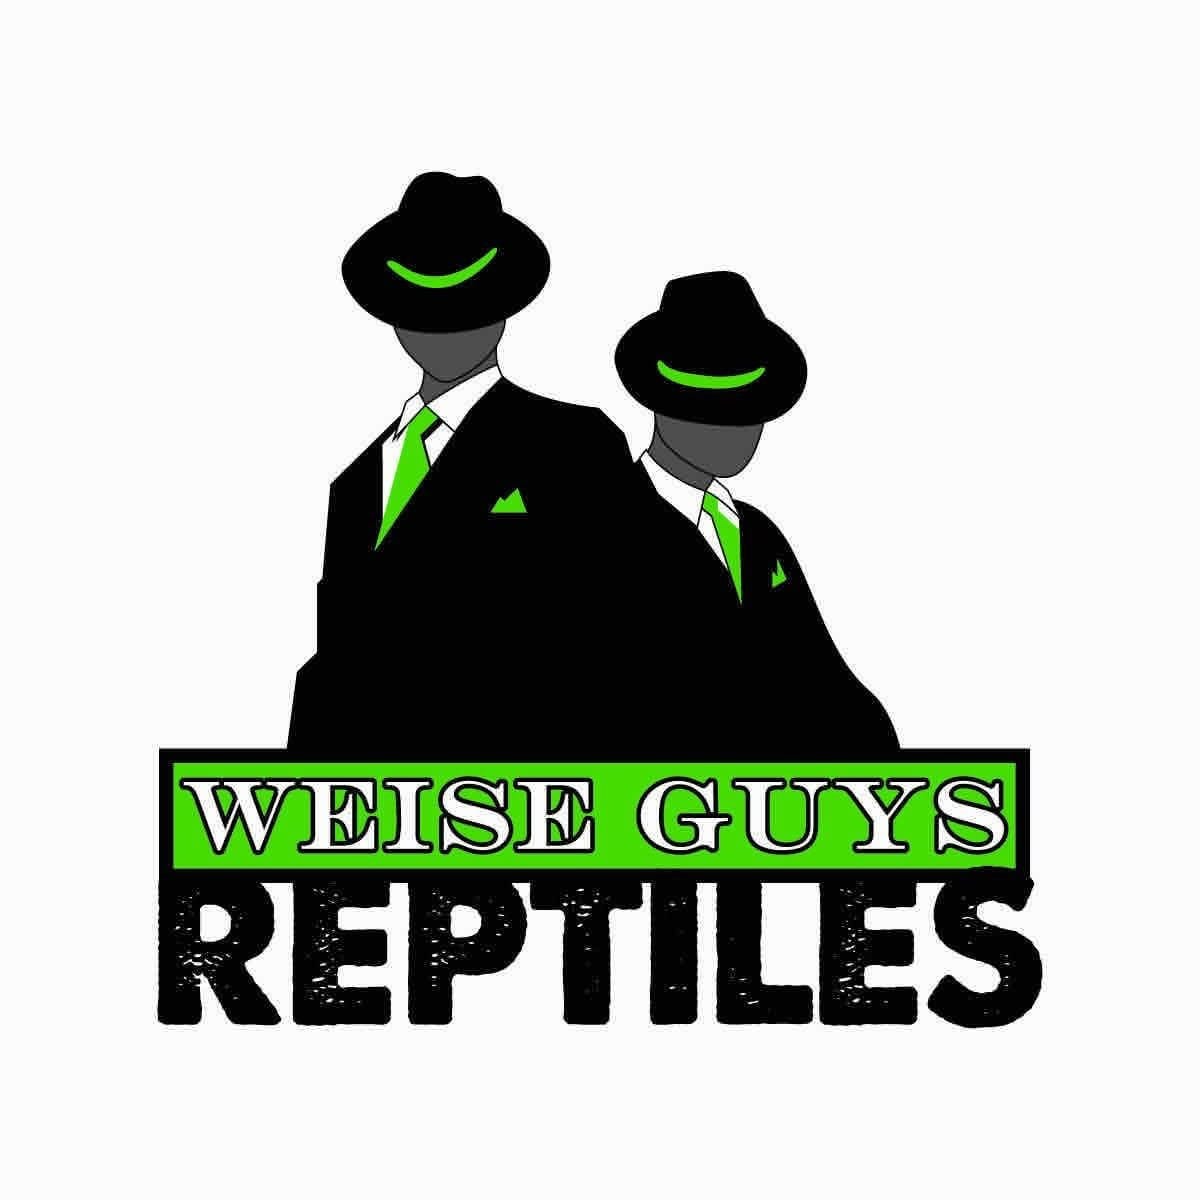 Weise Guys Reptile show